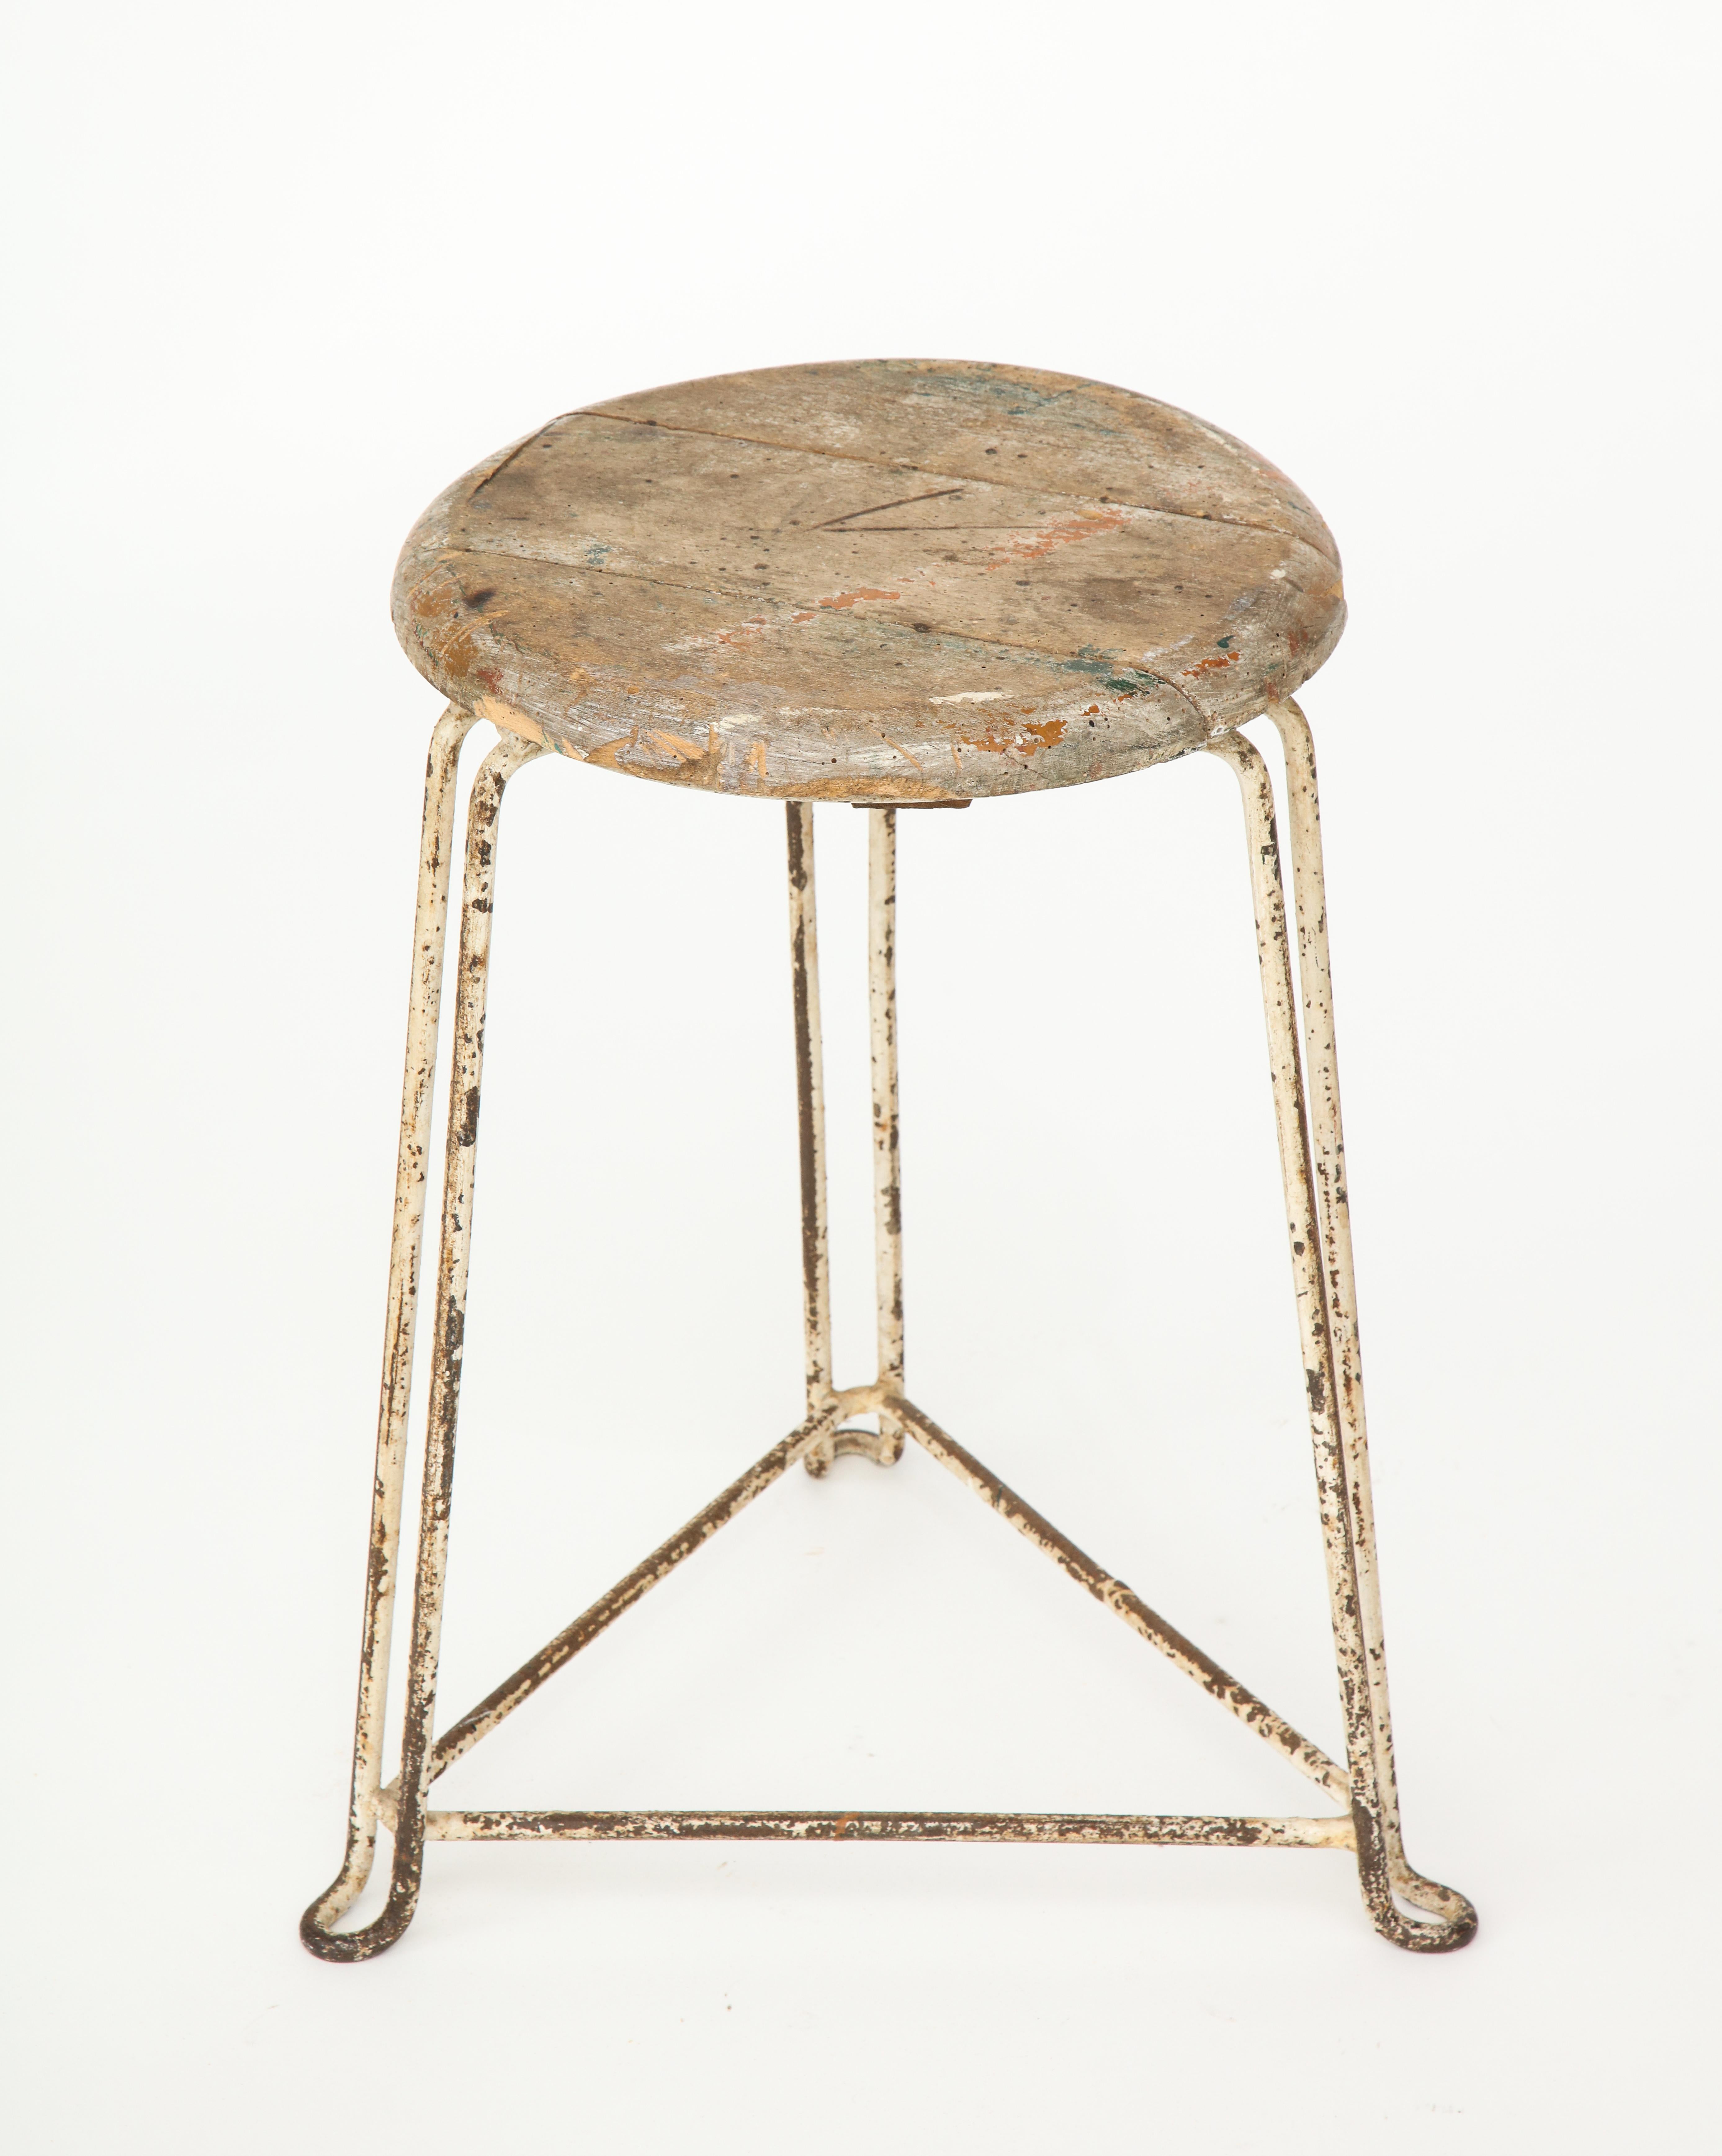 Wood and Metal Modern Industrial Vintage Stool, Heavy Patina, Belgium 1940's For Sale 1